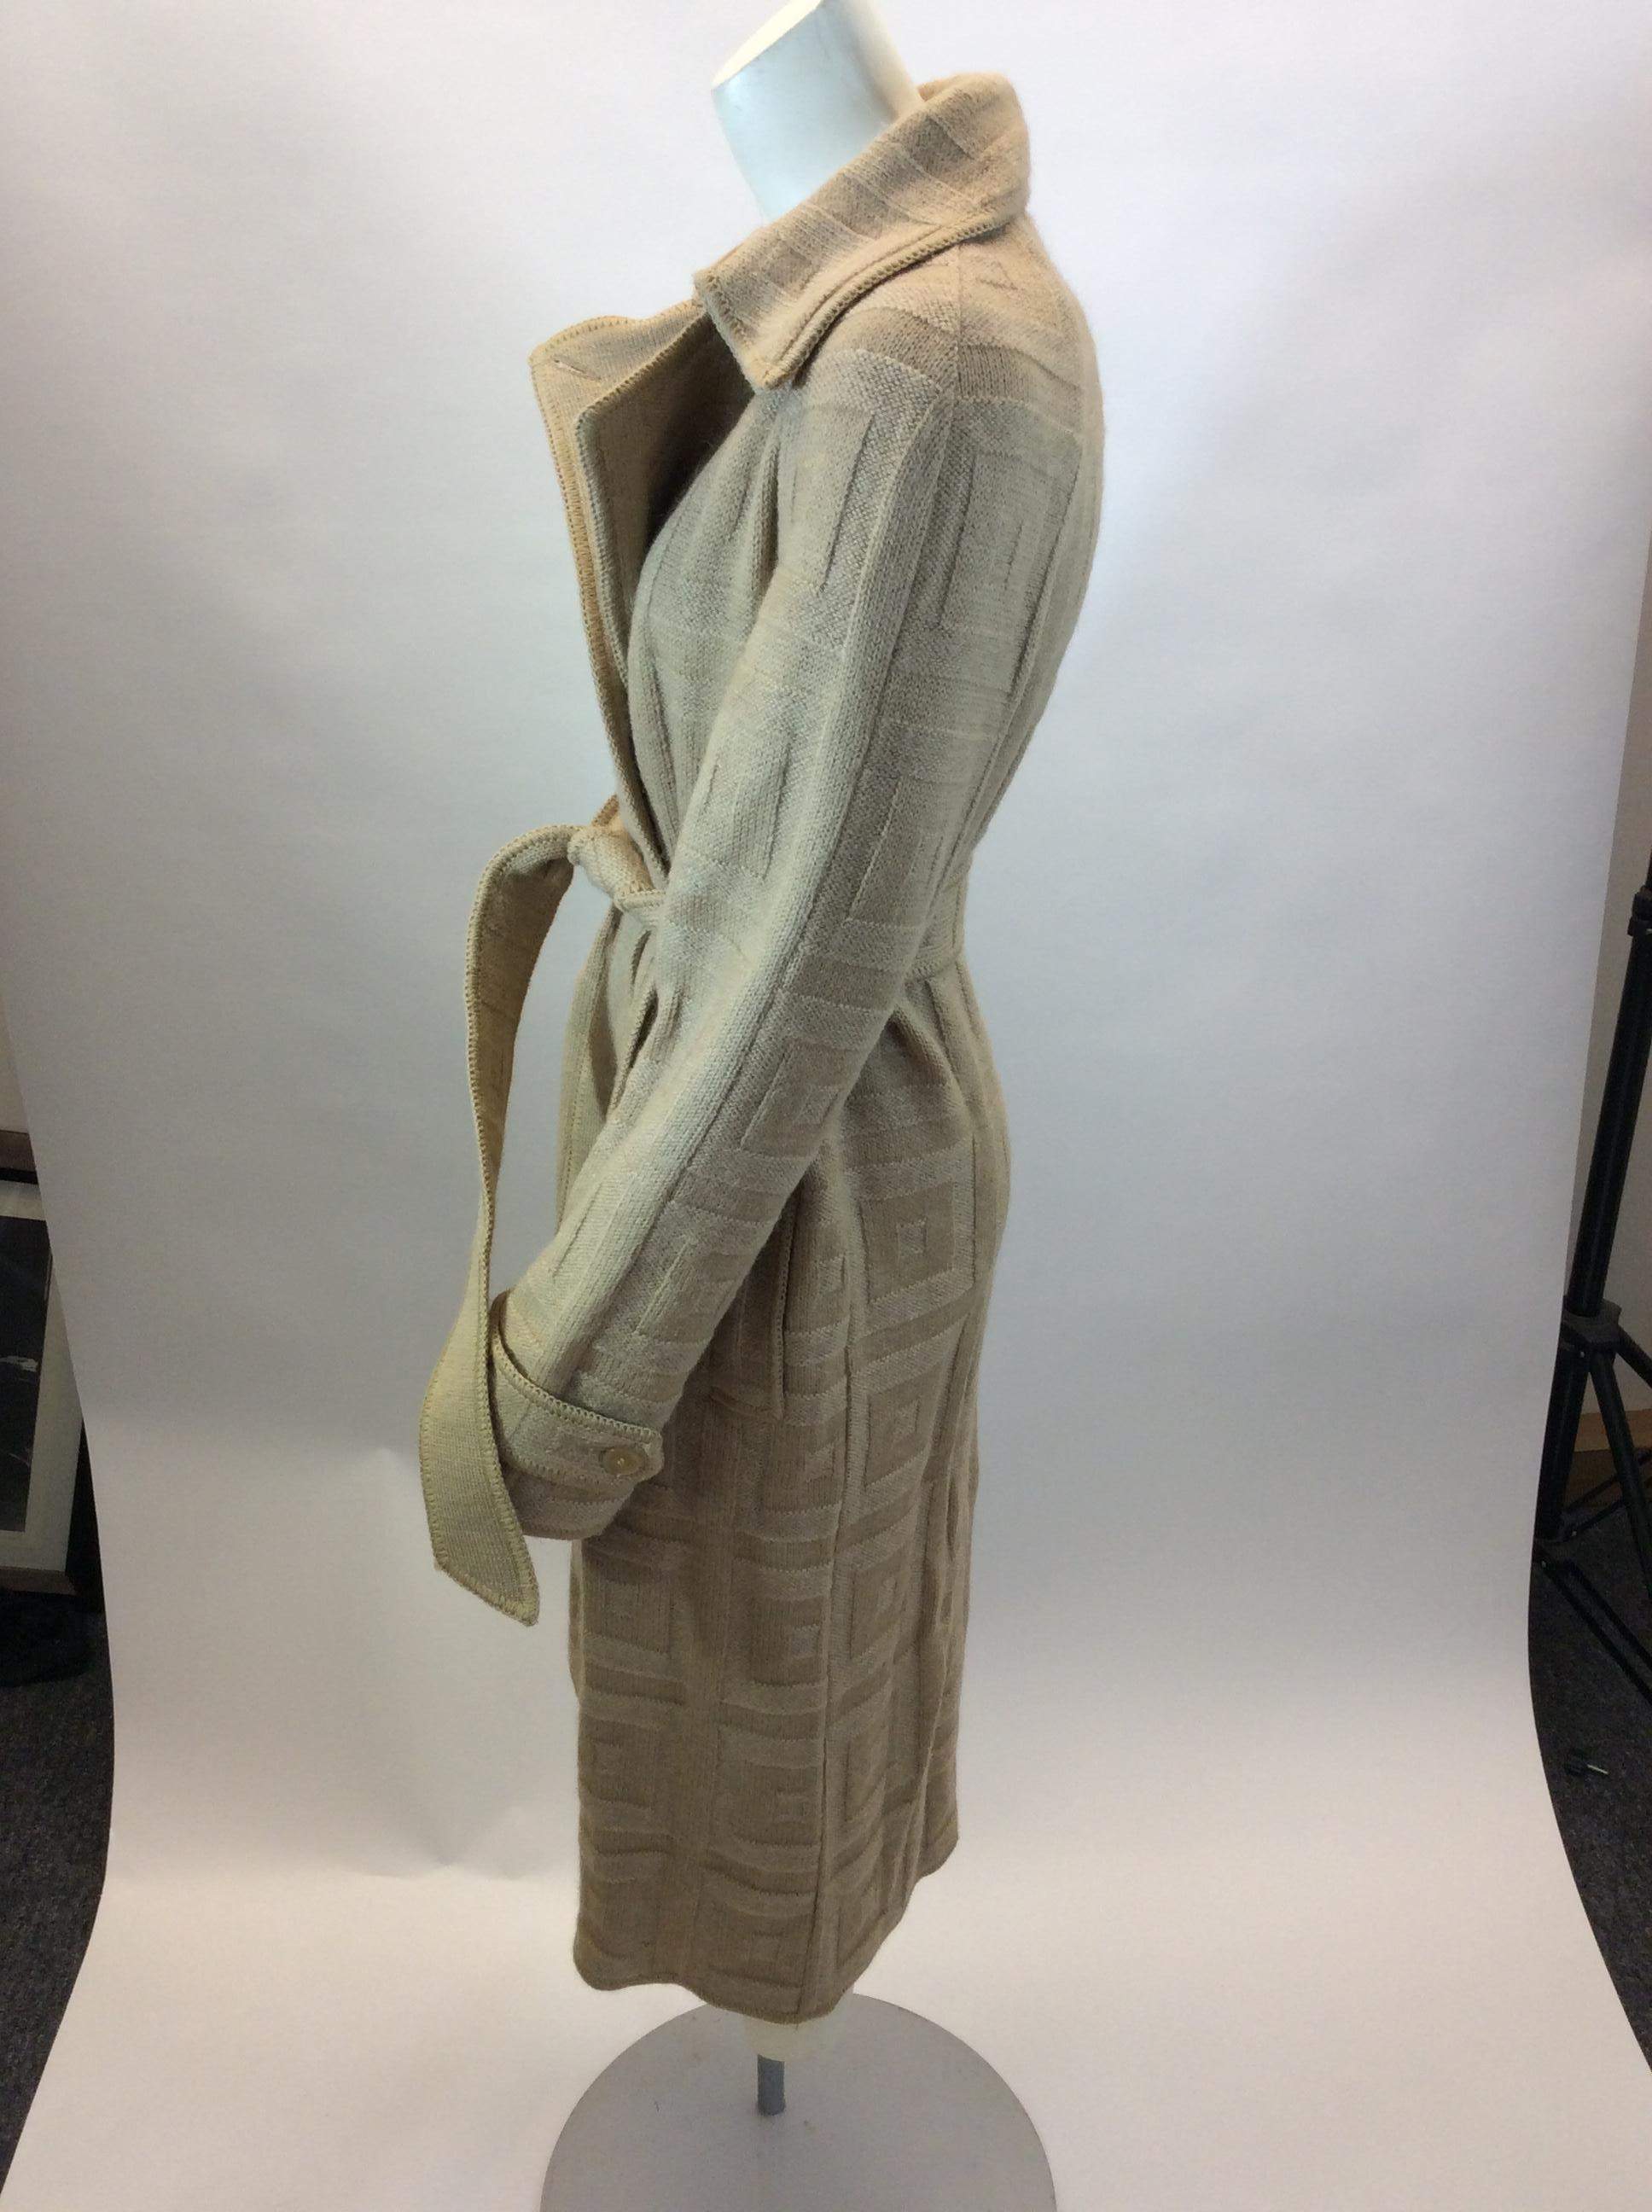 Missoni Camel Knit Wool Coat
$499
Made in Italy
77% wool, 6% nylon, 17% mohair 
Size 40
Length 43